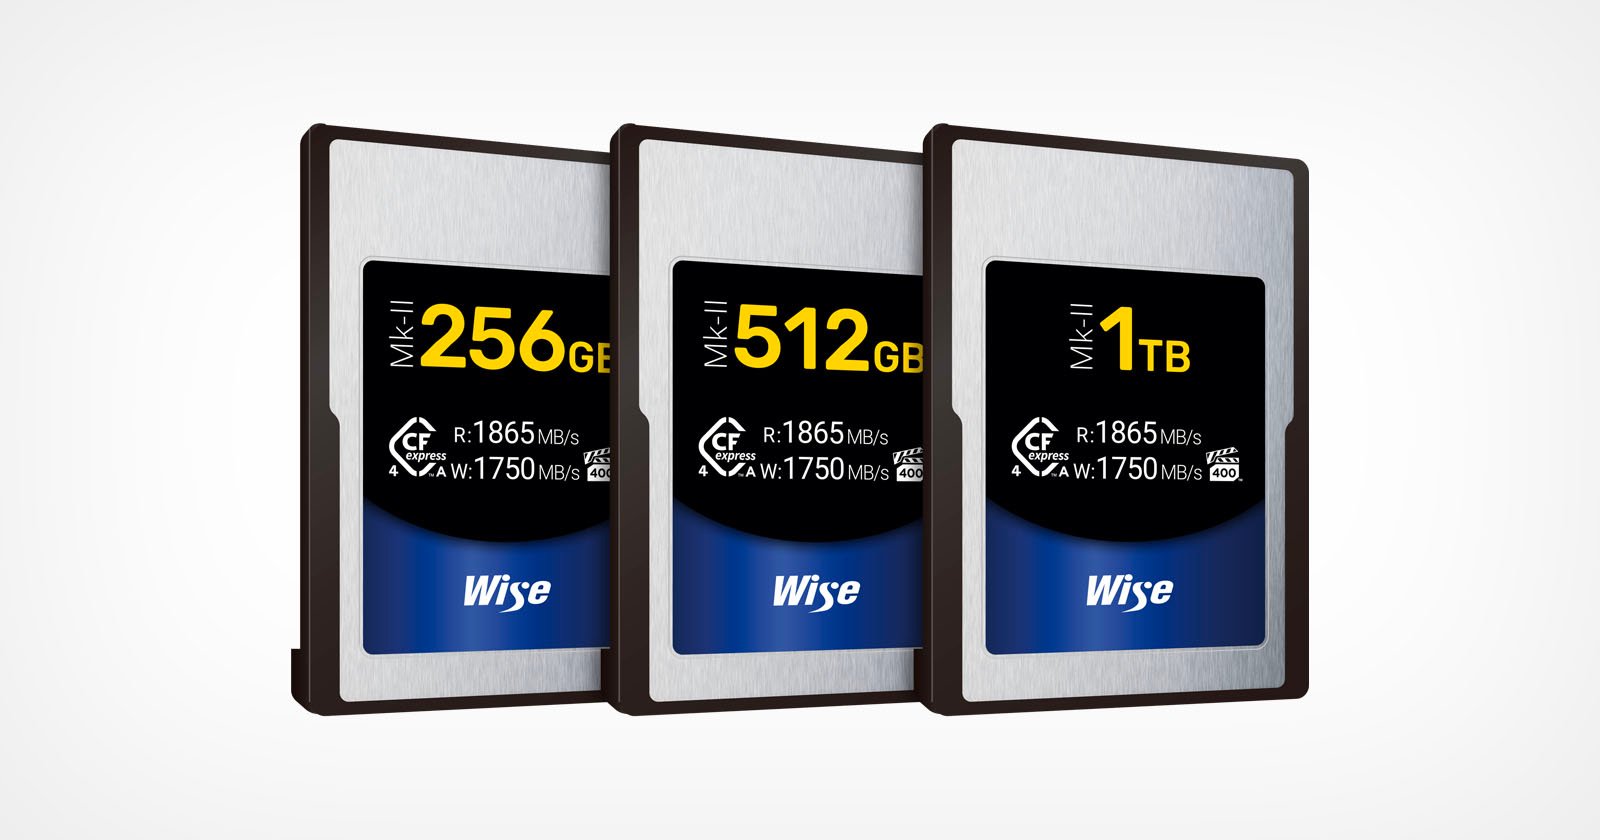  wise sony memory cards are now certified perform 